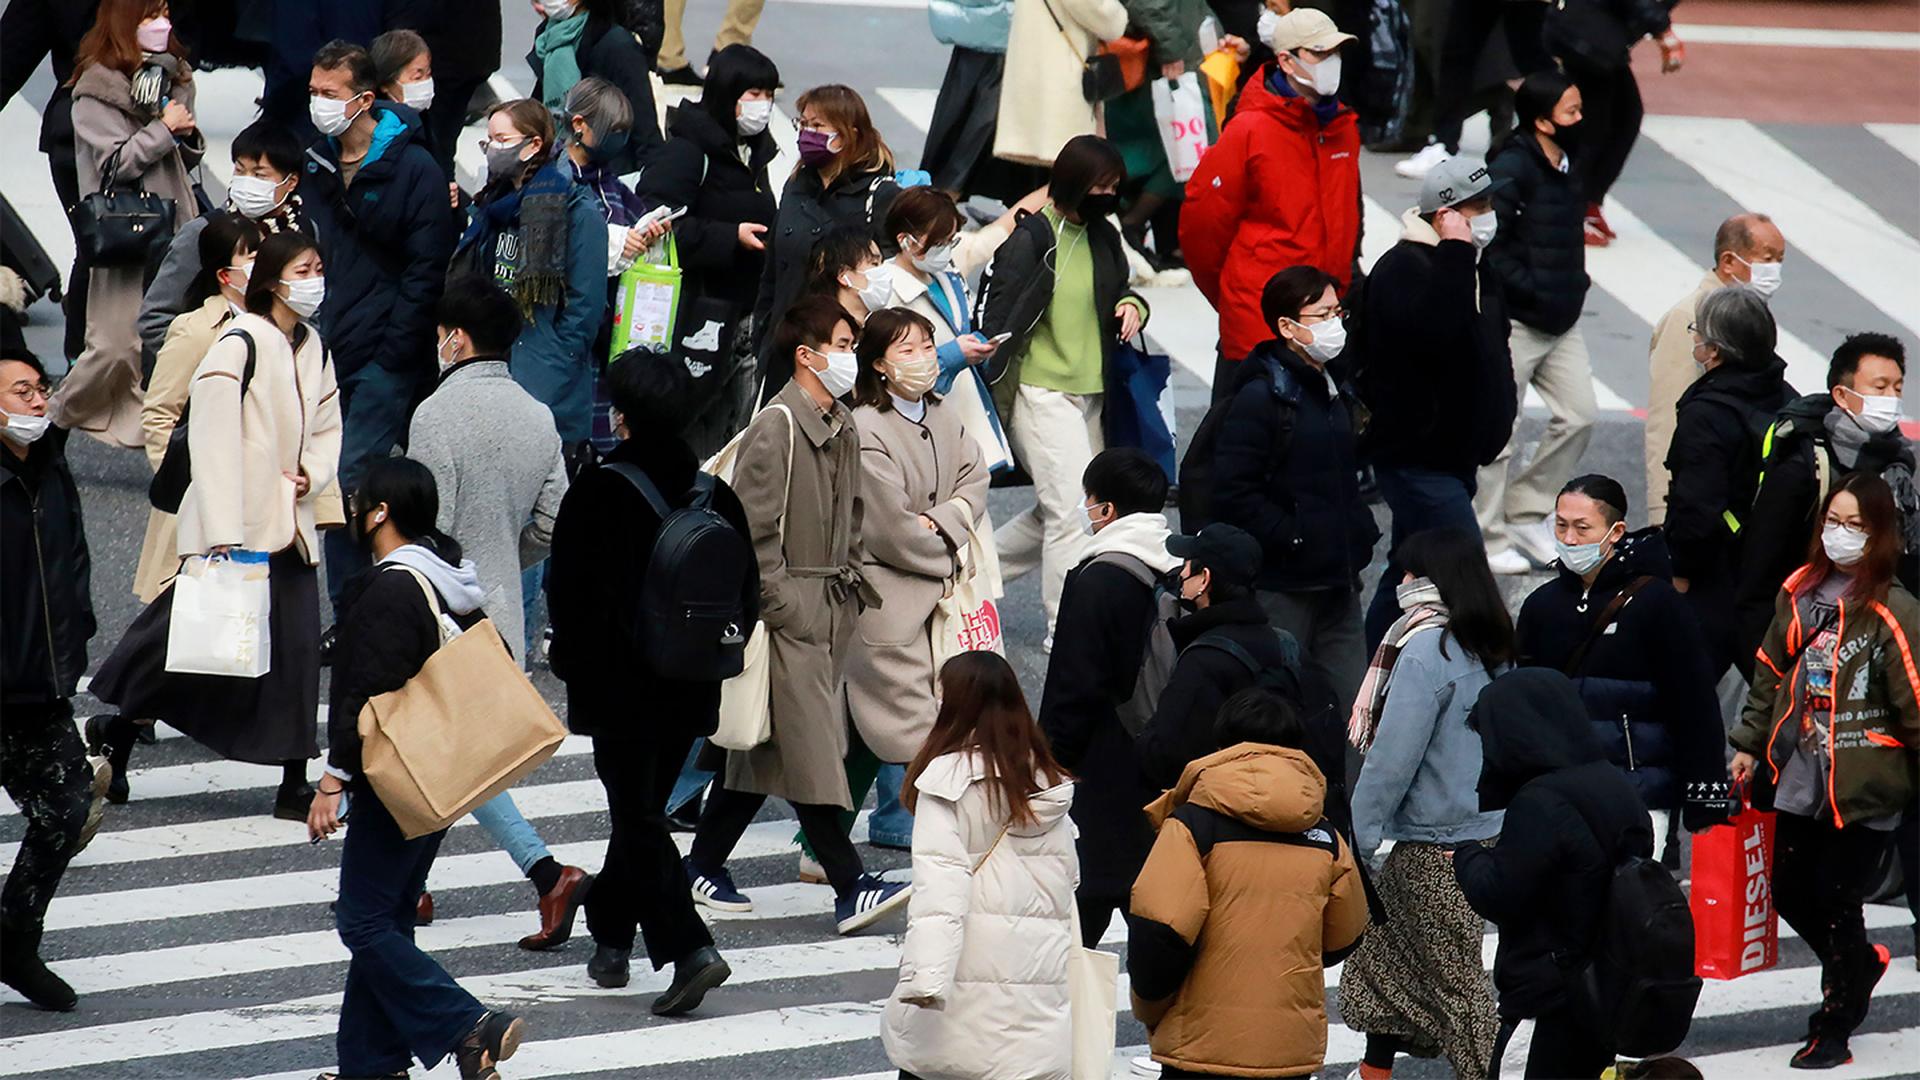 People wearing face masks to help protect against the spread of the coronavirus walk along the street in Tokyo, Japan